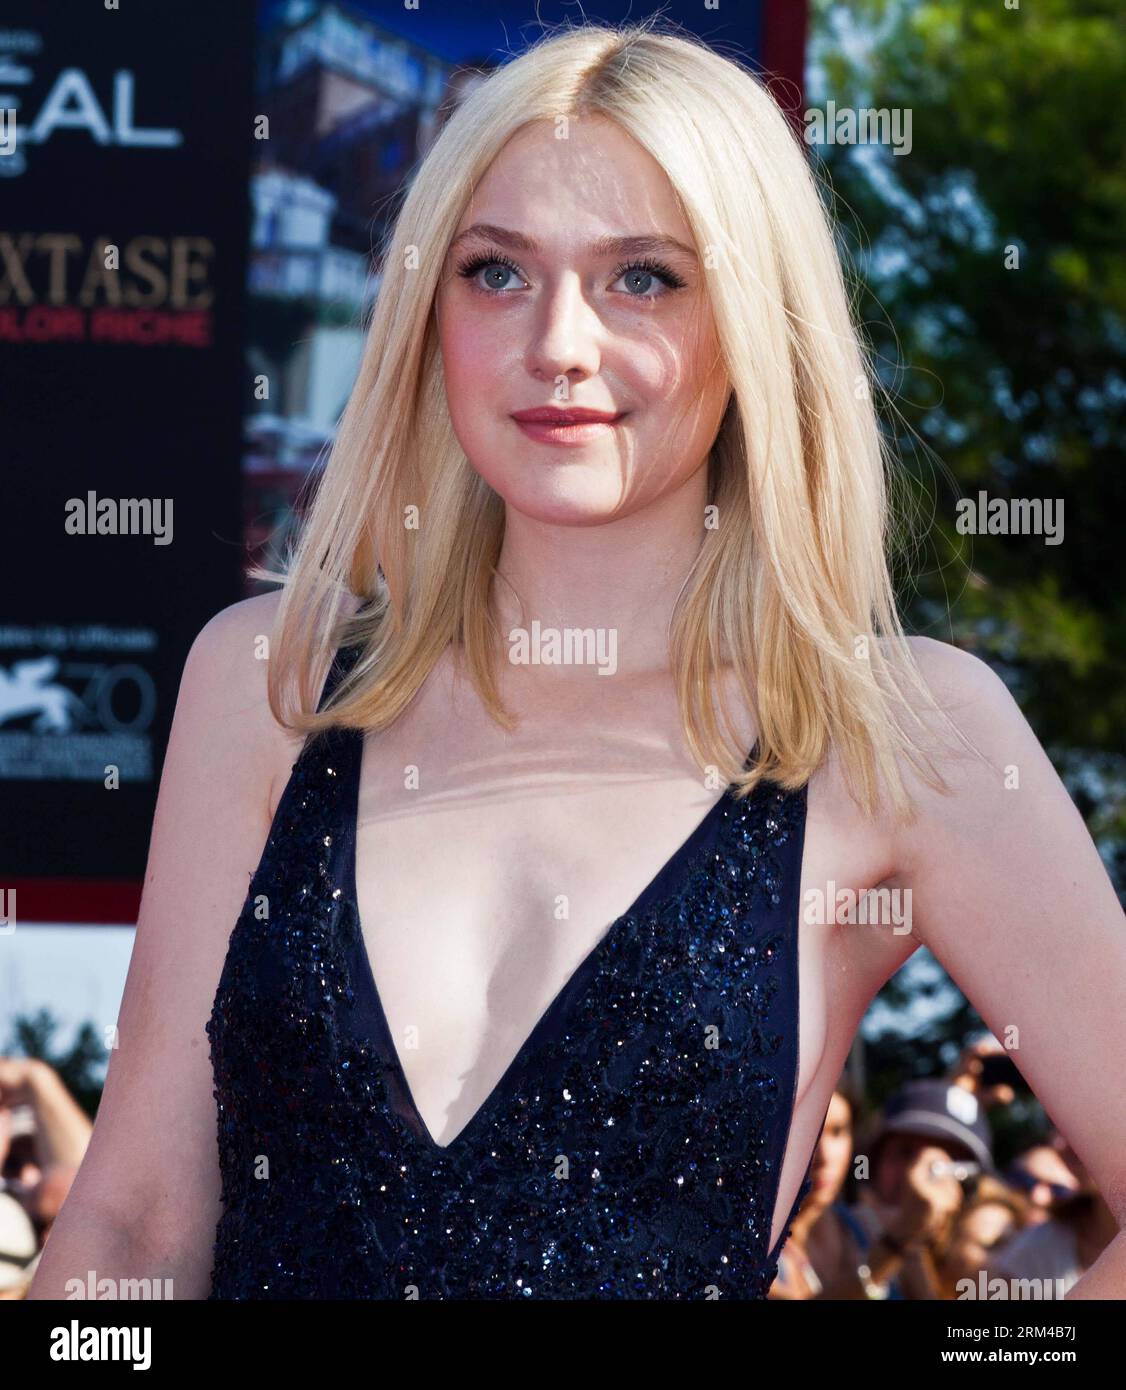 Bildnummer: 60417812  Datum: 31.08.2013  Copyright: imago/Xinhua (130831) -- VENICE, Aug. 31, 2013 (Xinhua) -- Dakota Fanning, actress of the movie Night Moves poses at red carpet during the 70th Venice International Film Festival in the Lido of Venice , Italy, Aug. 31, 2013. (Xinhua/Yan Ting) ITALY-VENICE-FILM-FESTIVAL-NIGHT MOVES PUBLICATIONxNOTxINxCHN Kultur Entertainment People Film 70 Internationale Filmfestspiele Venedig Filmpremiere Premiere Porträt xsp x0x 2013 quadrat      60417812 Date 31 08 2013 Copyright Imago XINHUA  Venice Aug 31 2013 XINHUA Dakota Fanning actress of The Movie Ni Stock Photo